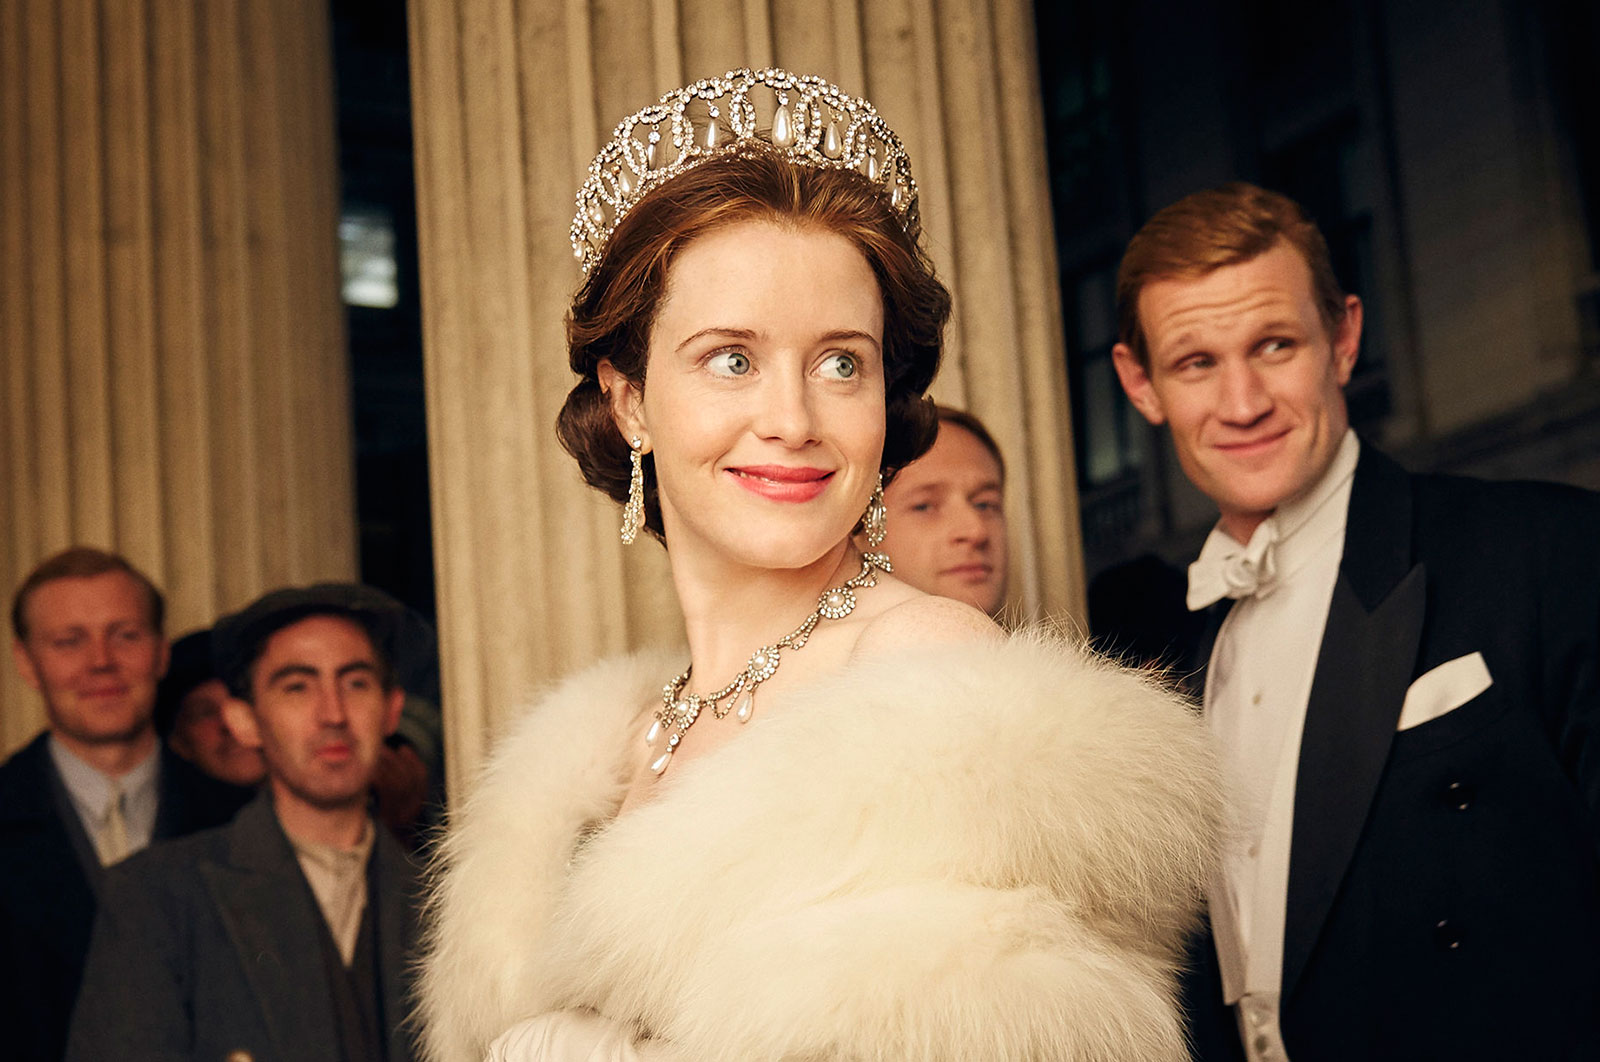 If You’ve Seen 21/26 of These Shows, You’re a Netflix Addict The Crown